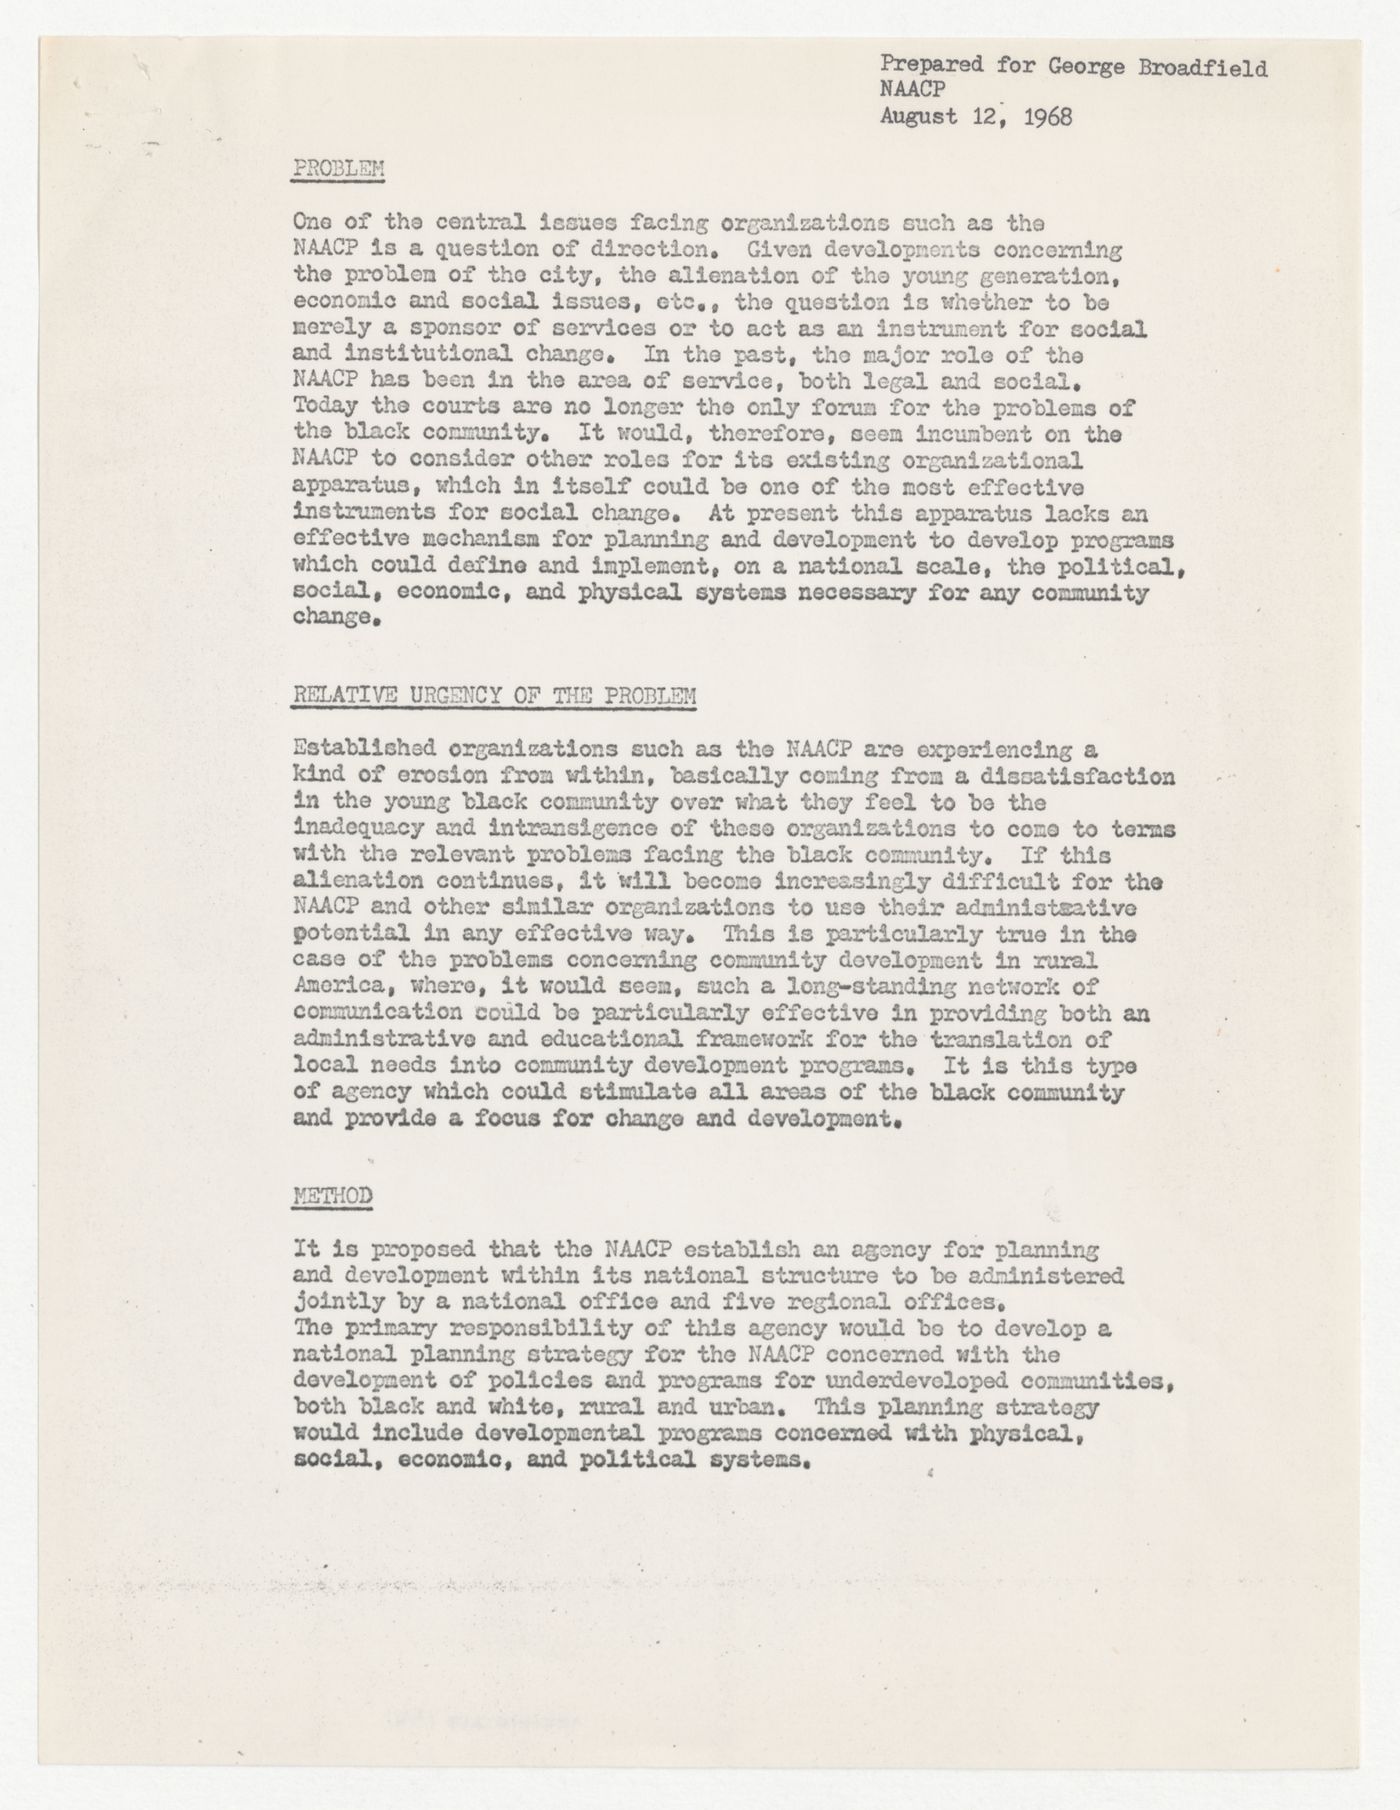 Letter from Peter D. Eisenman to George Broadfield with attached draft project proposal for a planning and development agency for the National Association for the Advancement of Colored People (NAACP) National Office